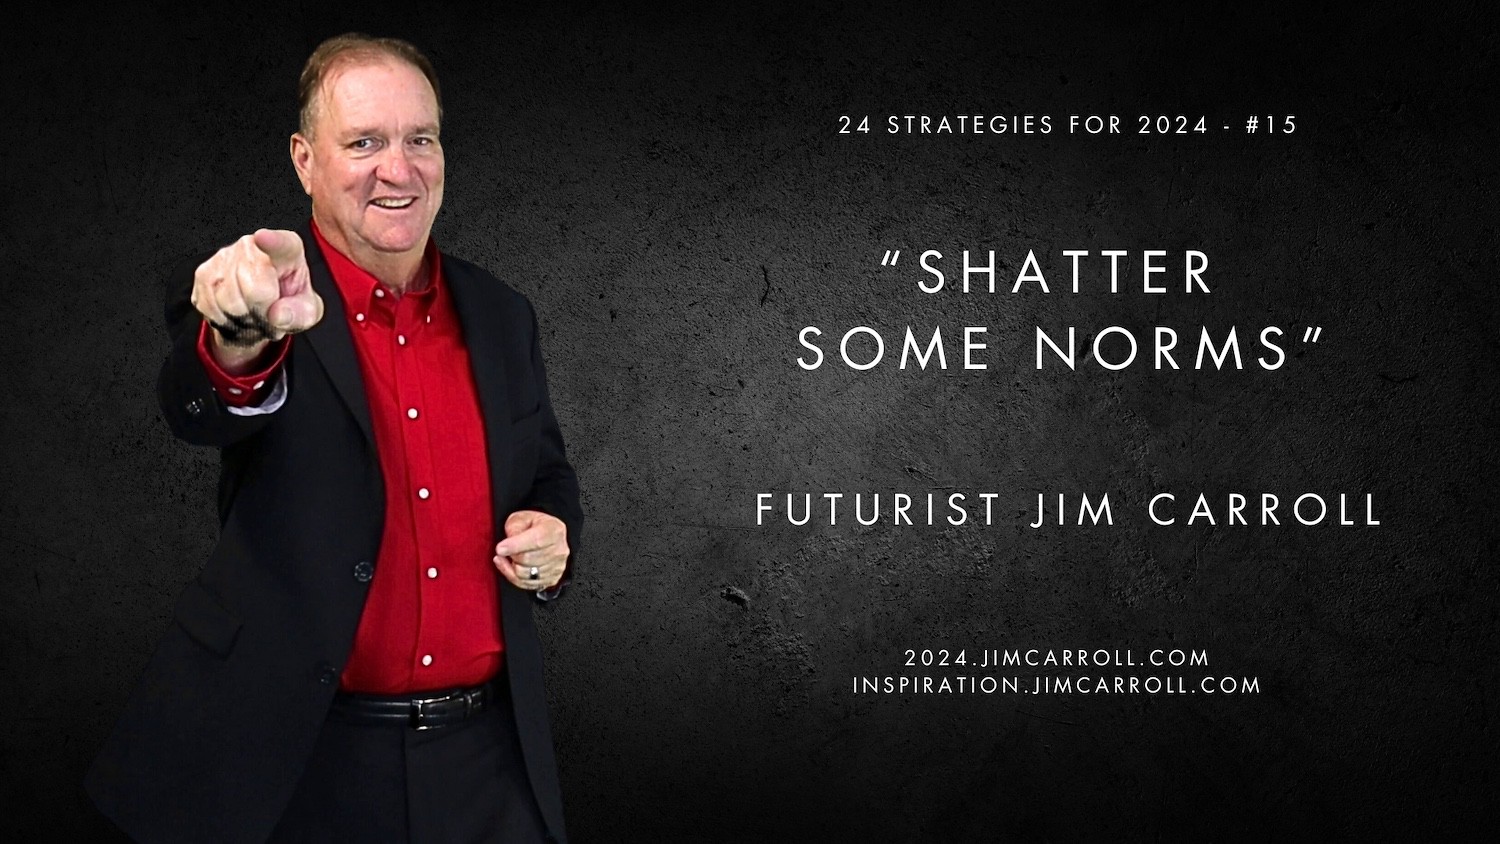 "Shatter some norms" - Futurist Jim Carroll